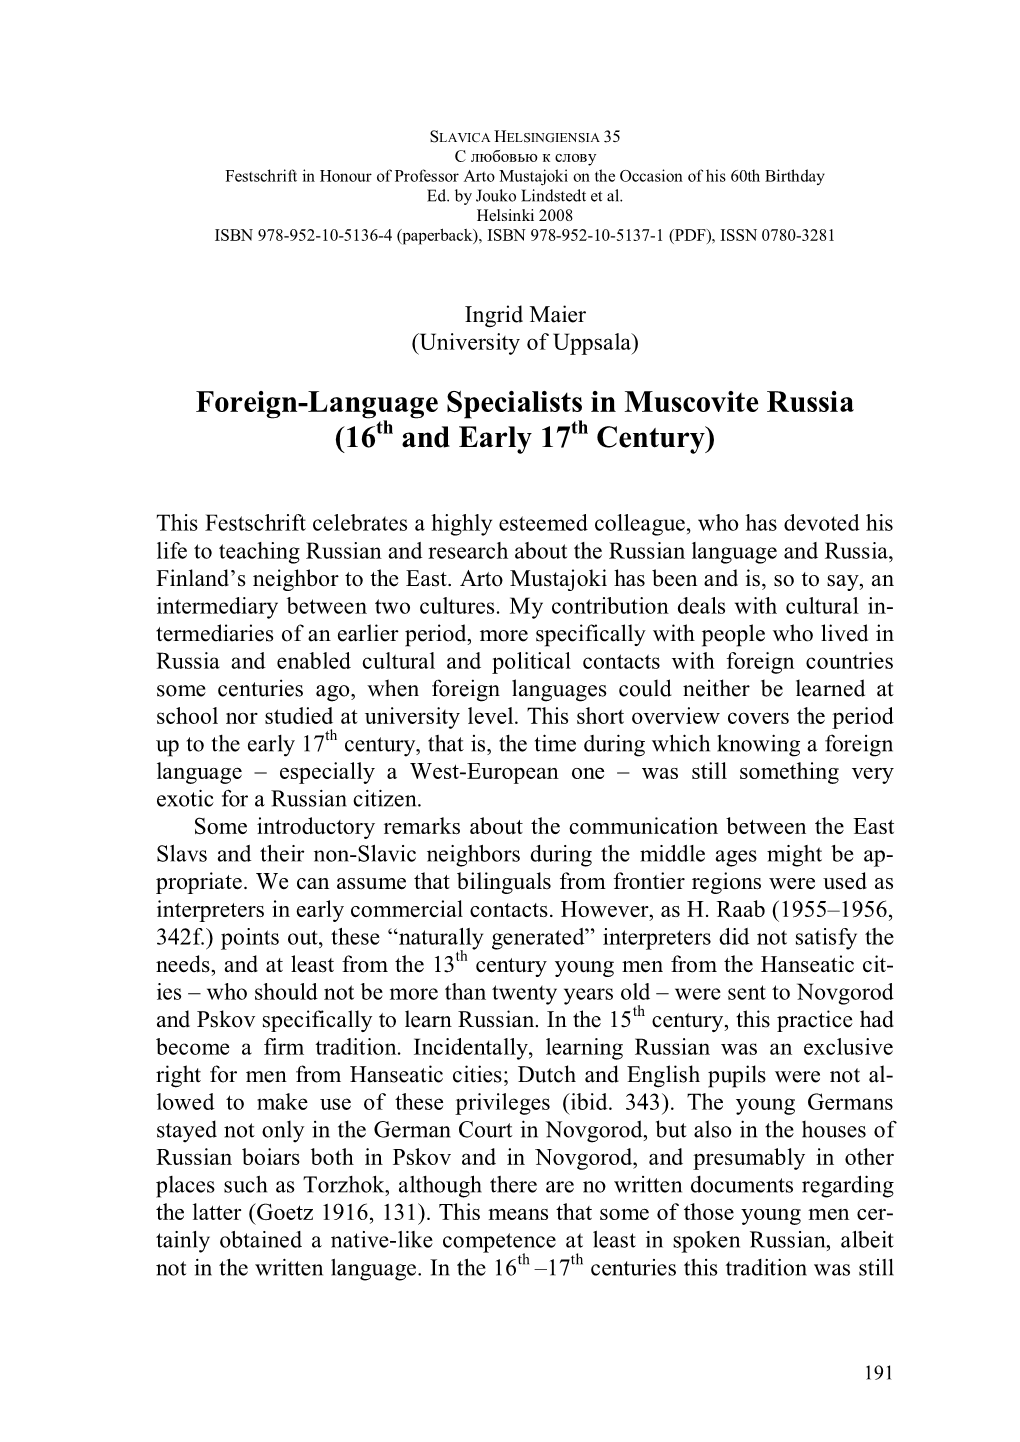 Foreign-Language Specialists in Muscovite Russia (16Th and Early 17Th Century)